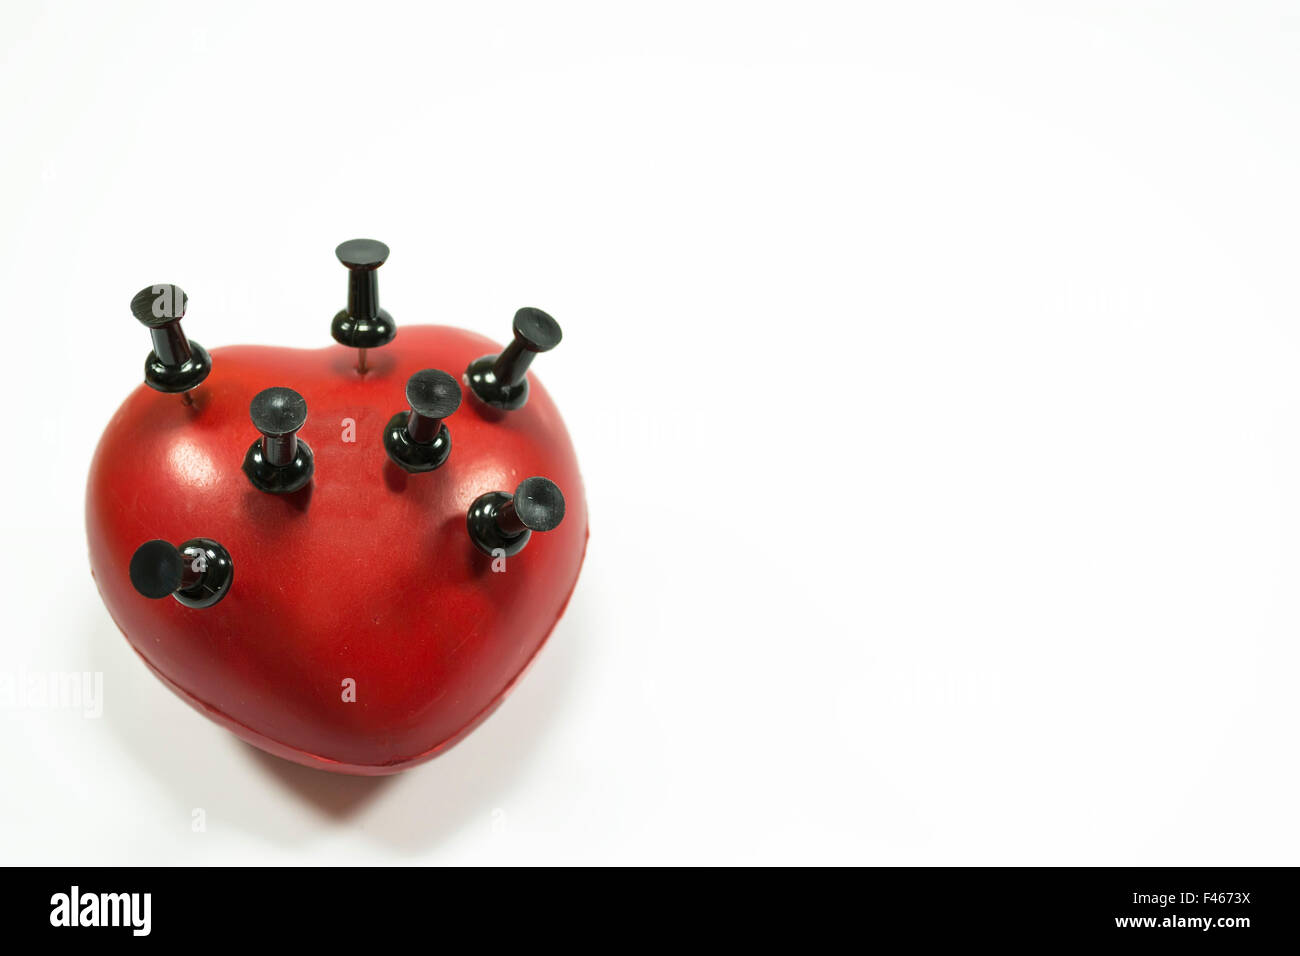 Red heart shape with black push pins puncturing it , conceptual image about heart related medical illnesses Stock Photo